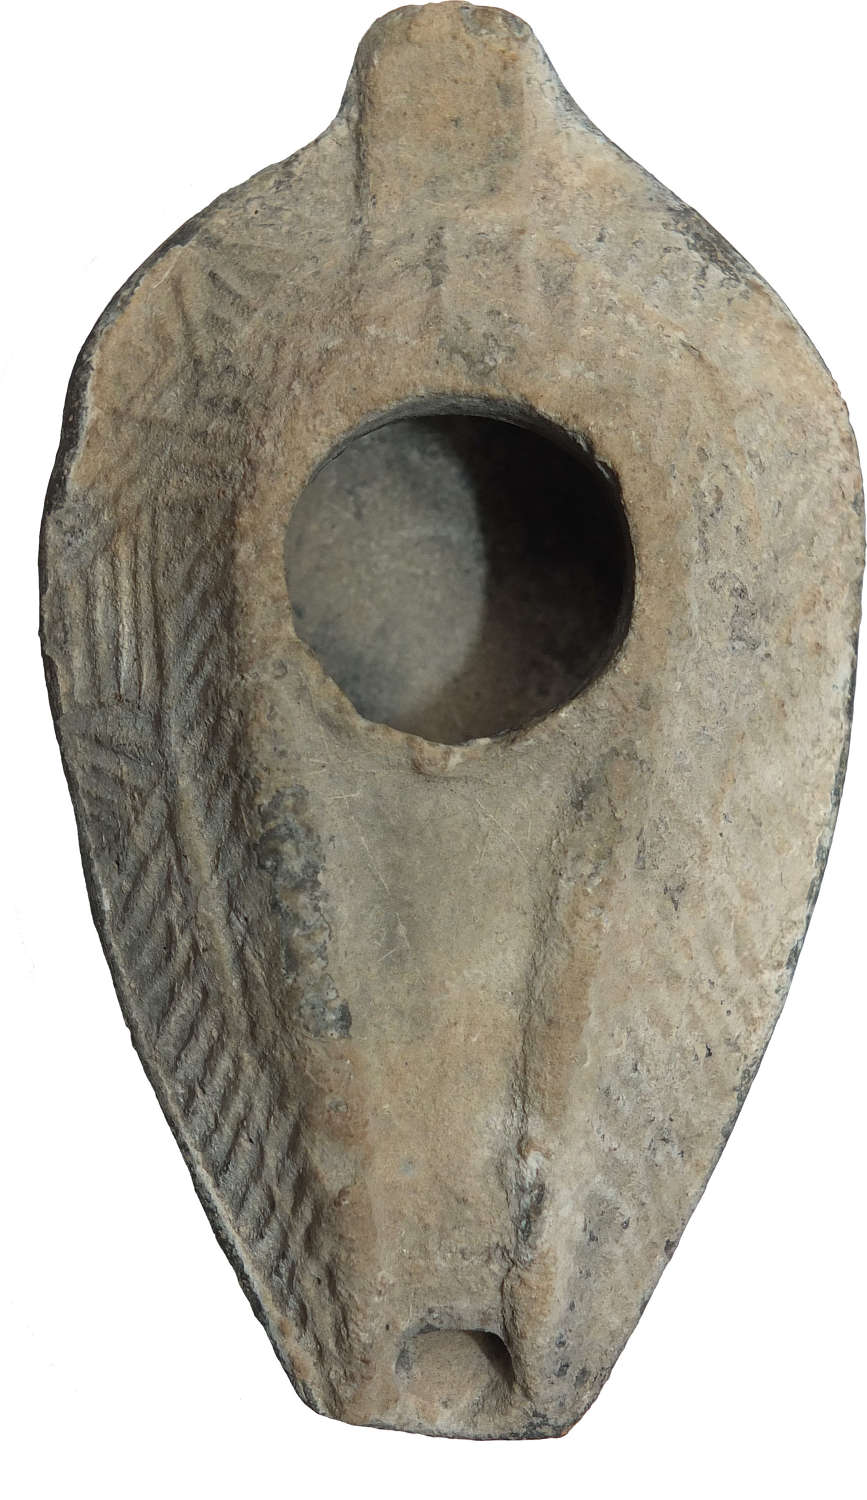 A grey-fawn Syro-Palestinian oil lamp, c. 500–700 A.D.